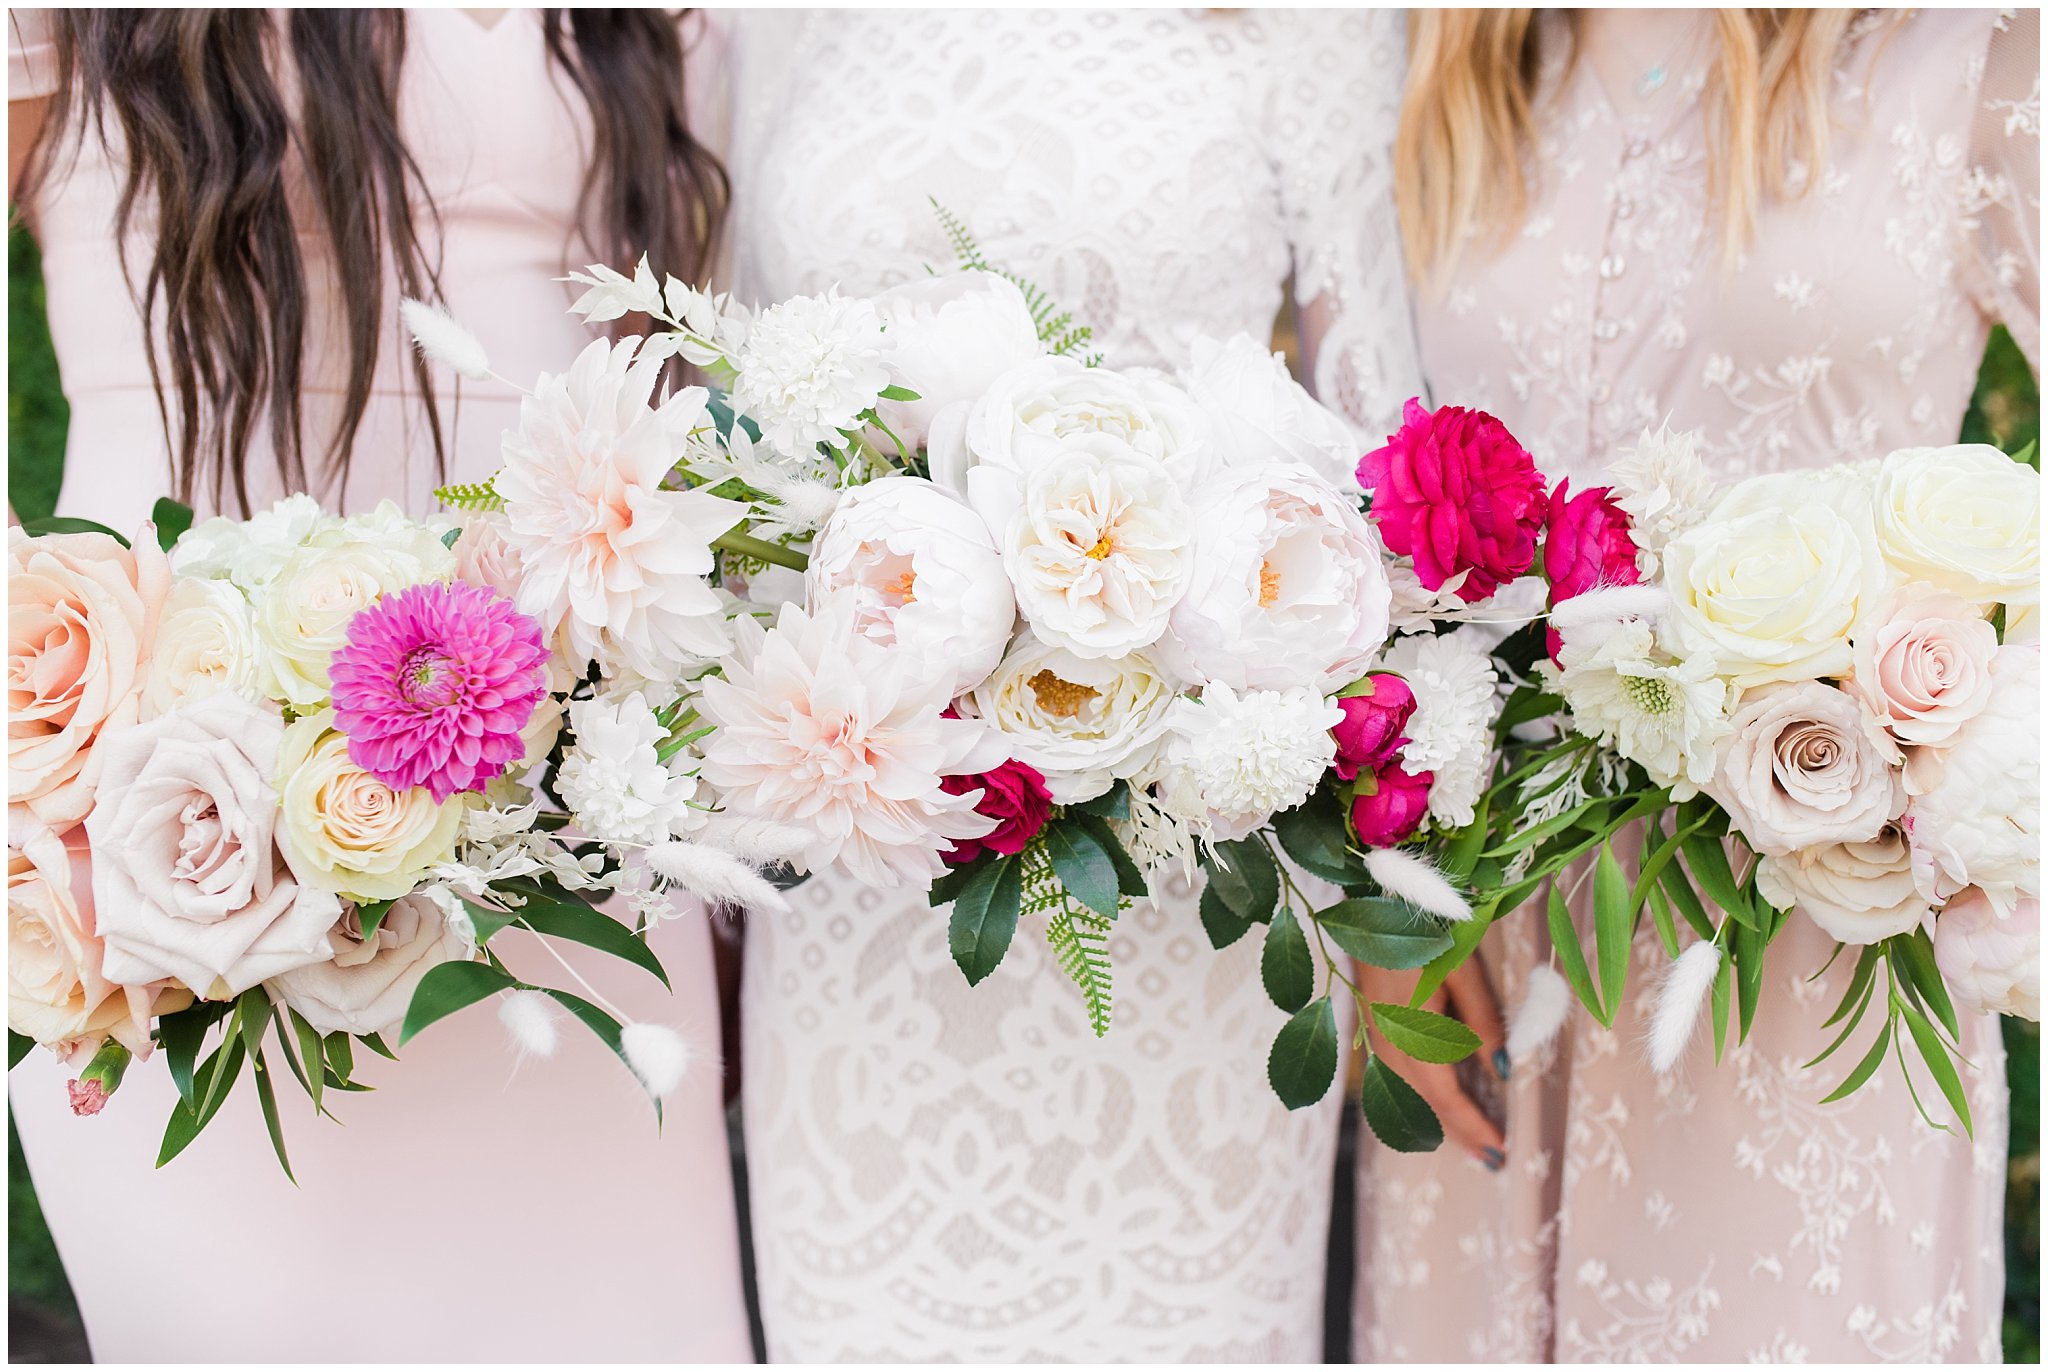 Wedding party with bridesmaids and bouquets of white with deep pink | Wadley Farms Summer Wedding | Jessie and Dallin Photography